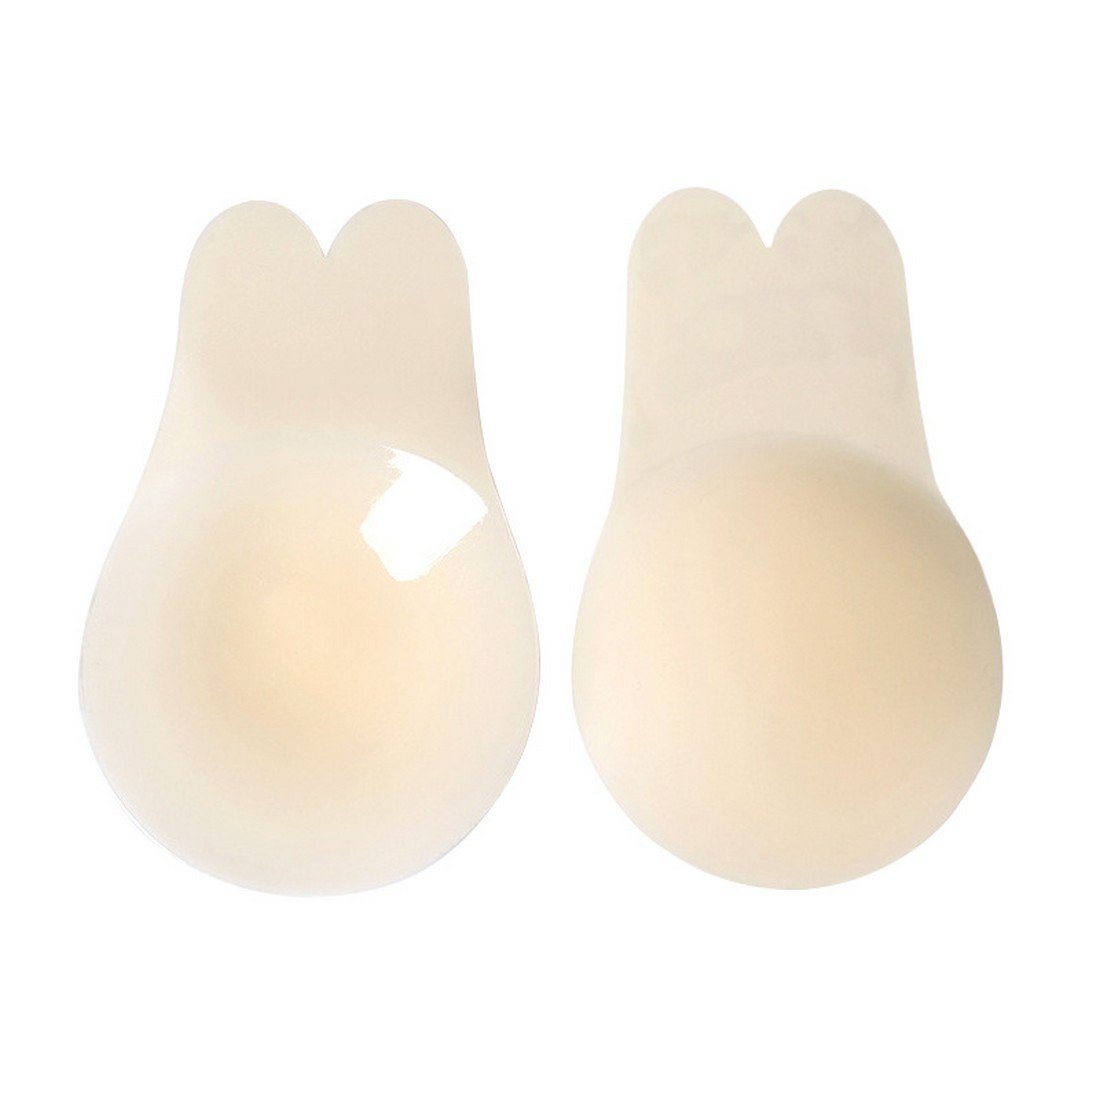  silicon bla silicon bra bla nipple cover cohesion bla repetition use silicon pad bust cohesion power high approximately 10*16cm